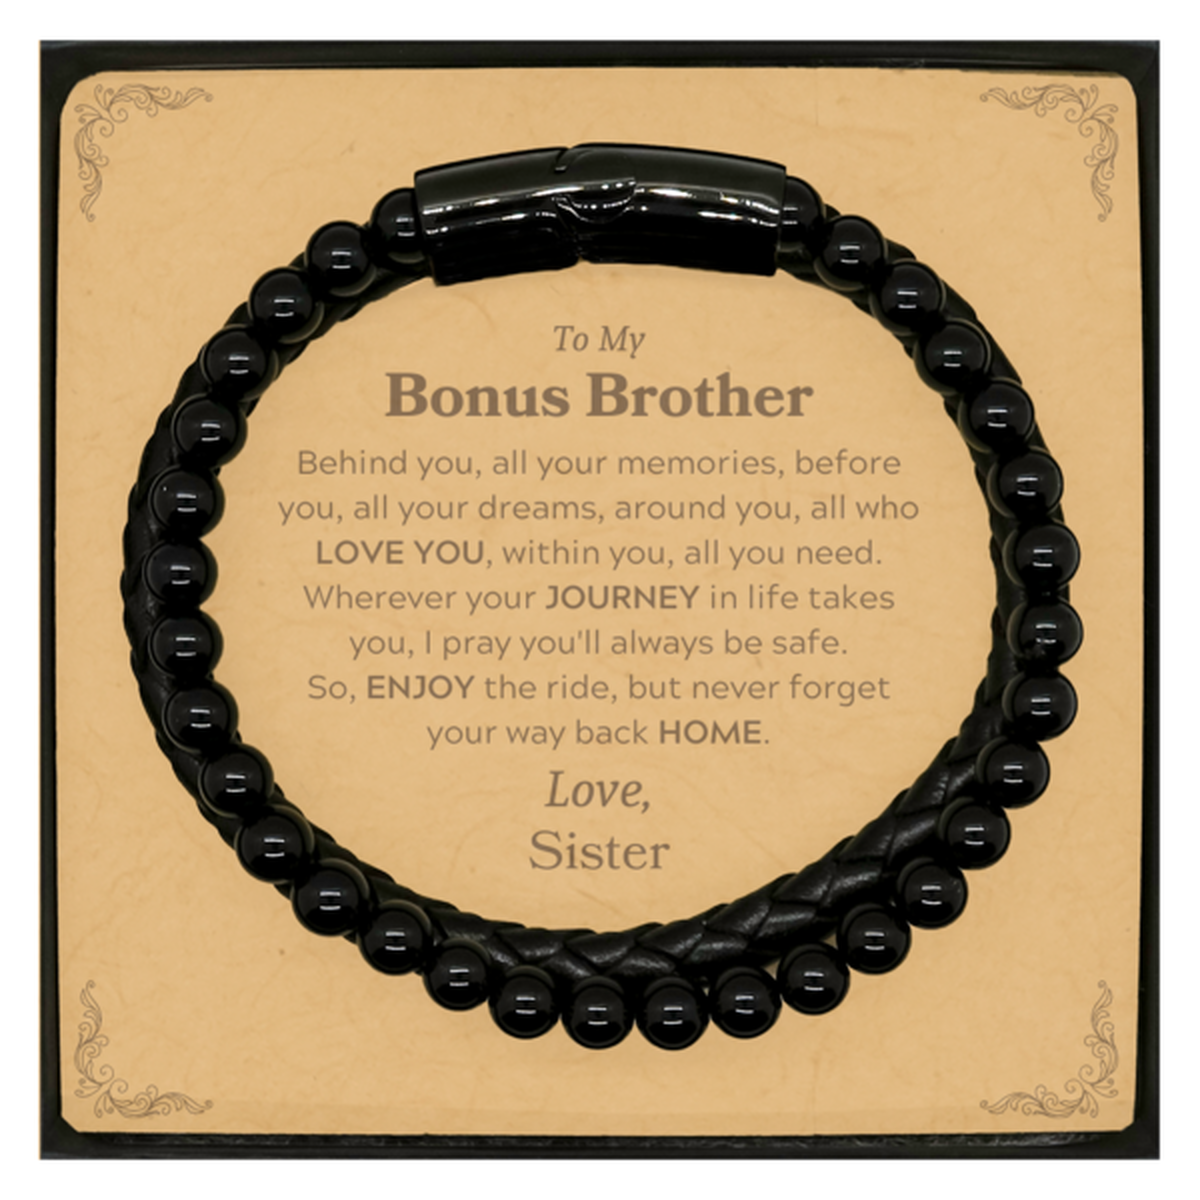 To My Bonus Brother Graduation Gifts from Sister, Bonus Brother Stone Leather Bracelets Christmas Birthday Gifts for Bonus Brother Behind you, all your memories, before you, all your dreams. Love, Sister